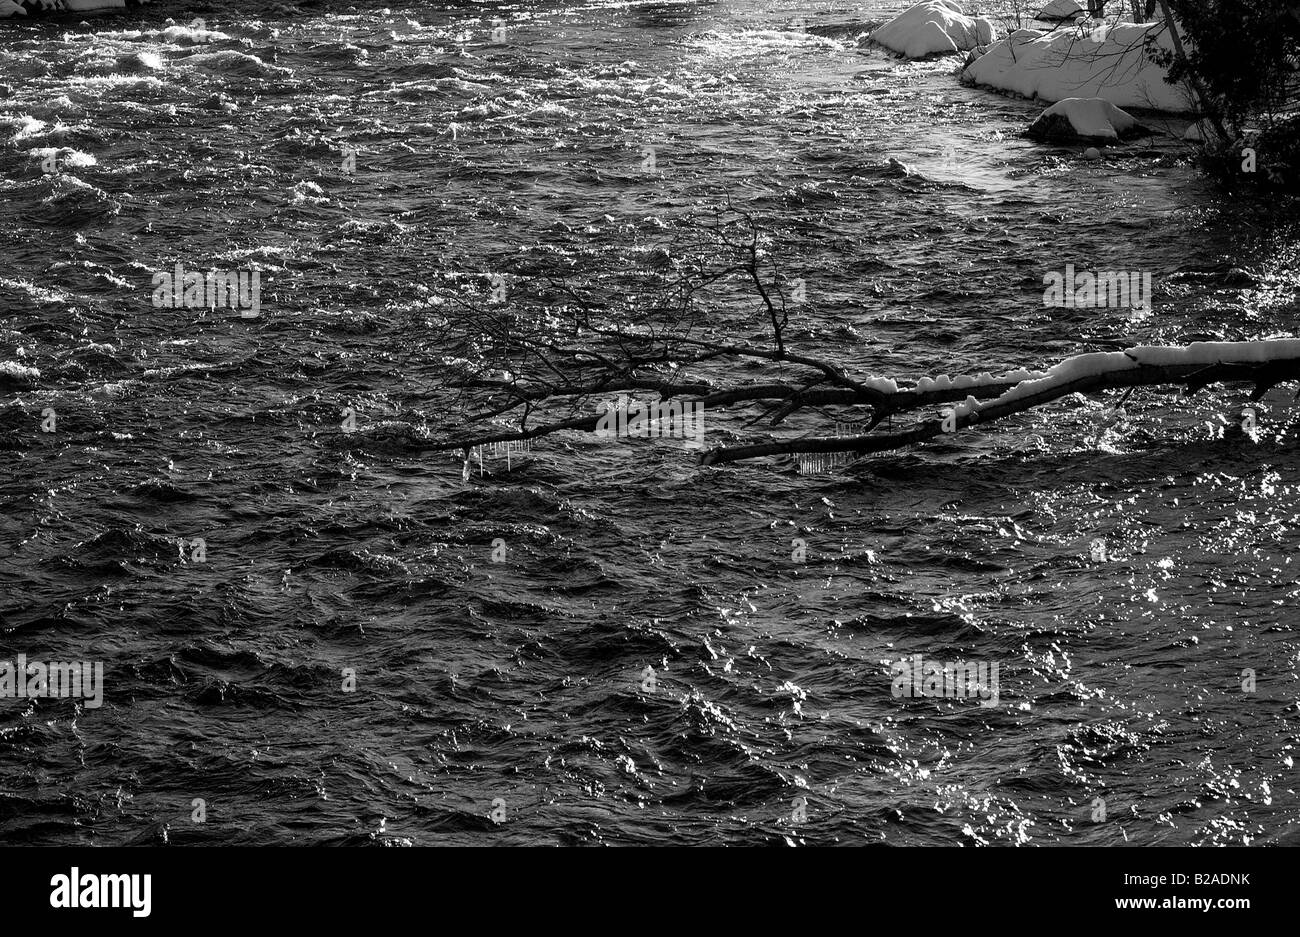 Water flowing down the flooded banks of a river, in Quebec Canada during winter season. Stock Photo